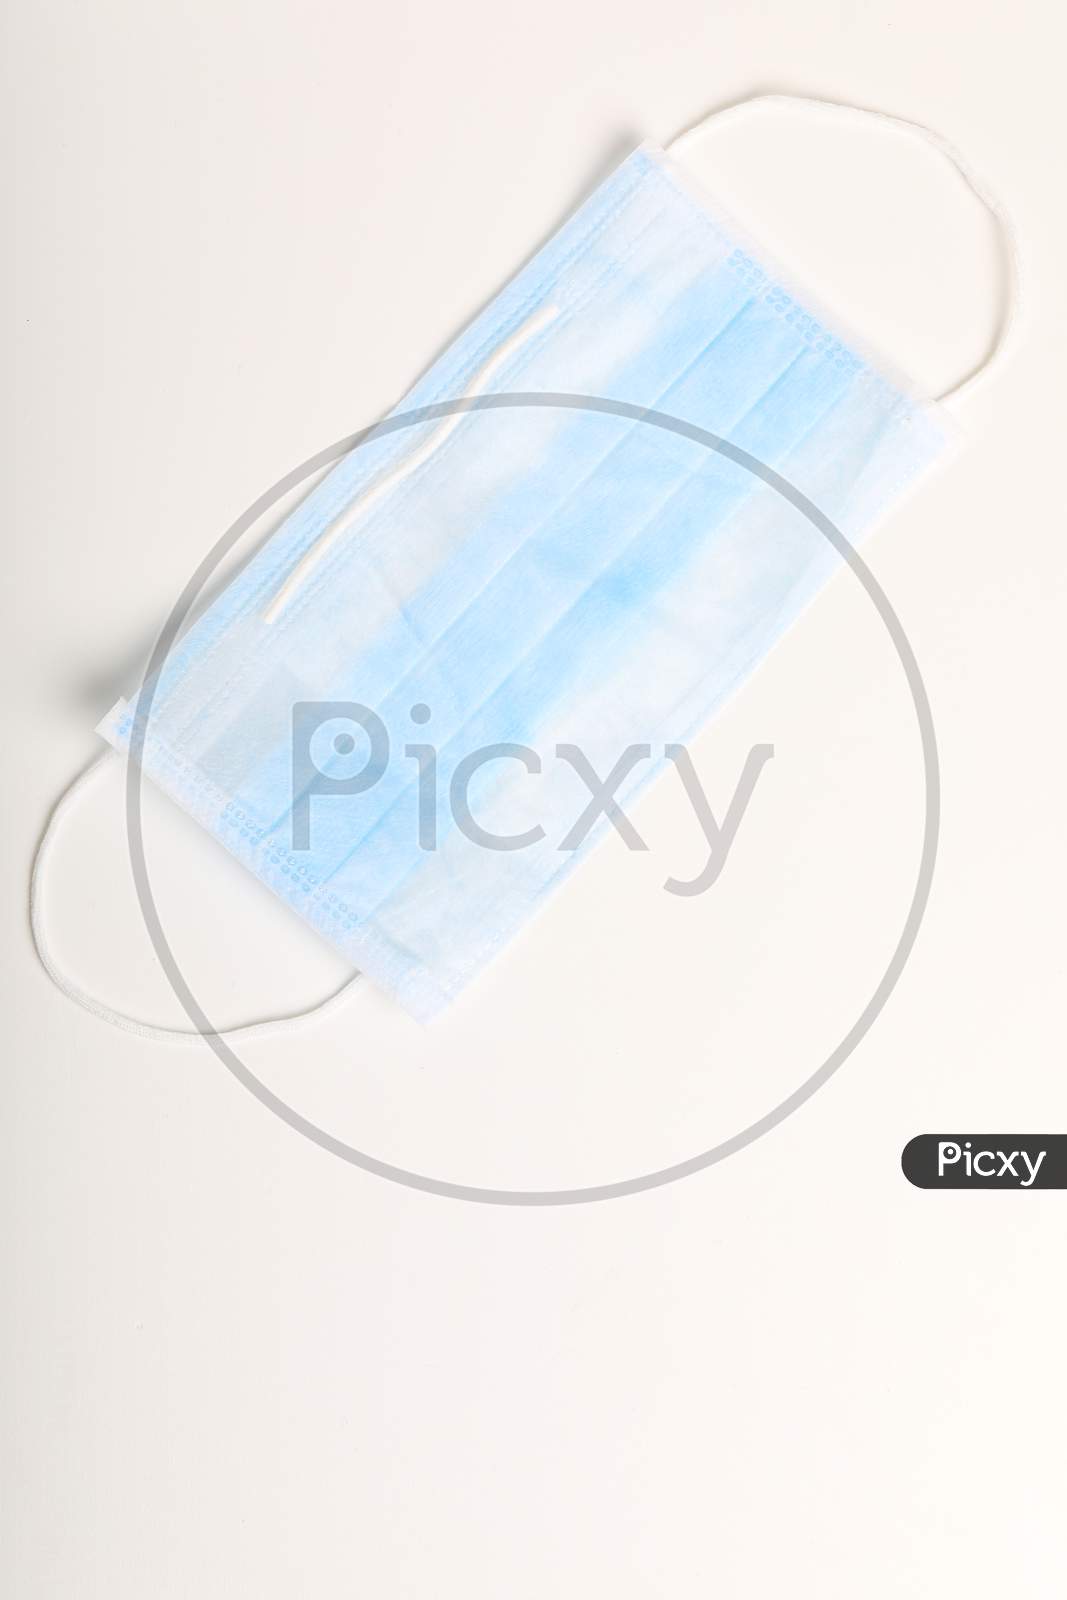 Medical Mask For Protection Against Flu And Corona Virus On White Background